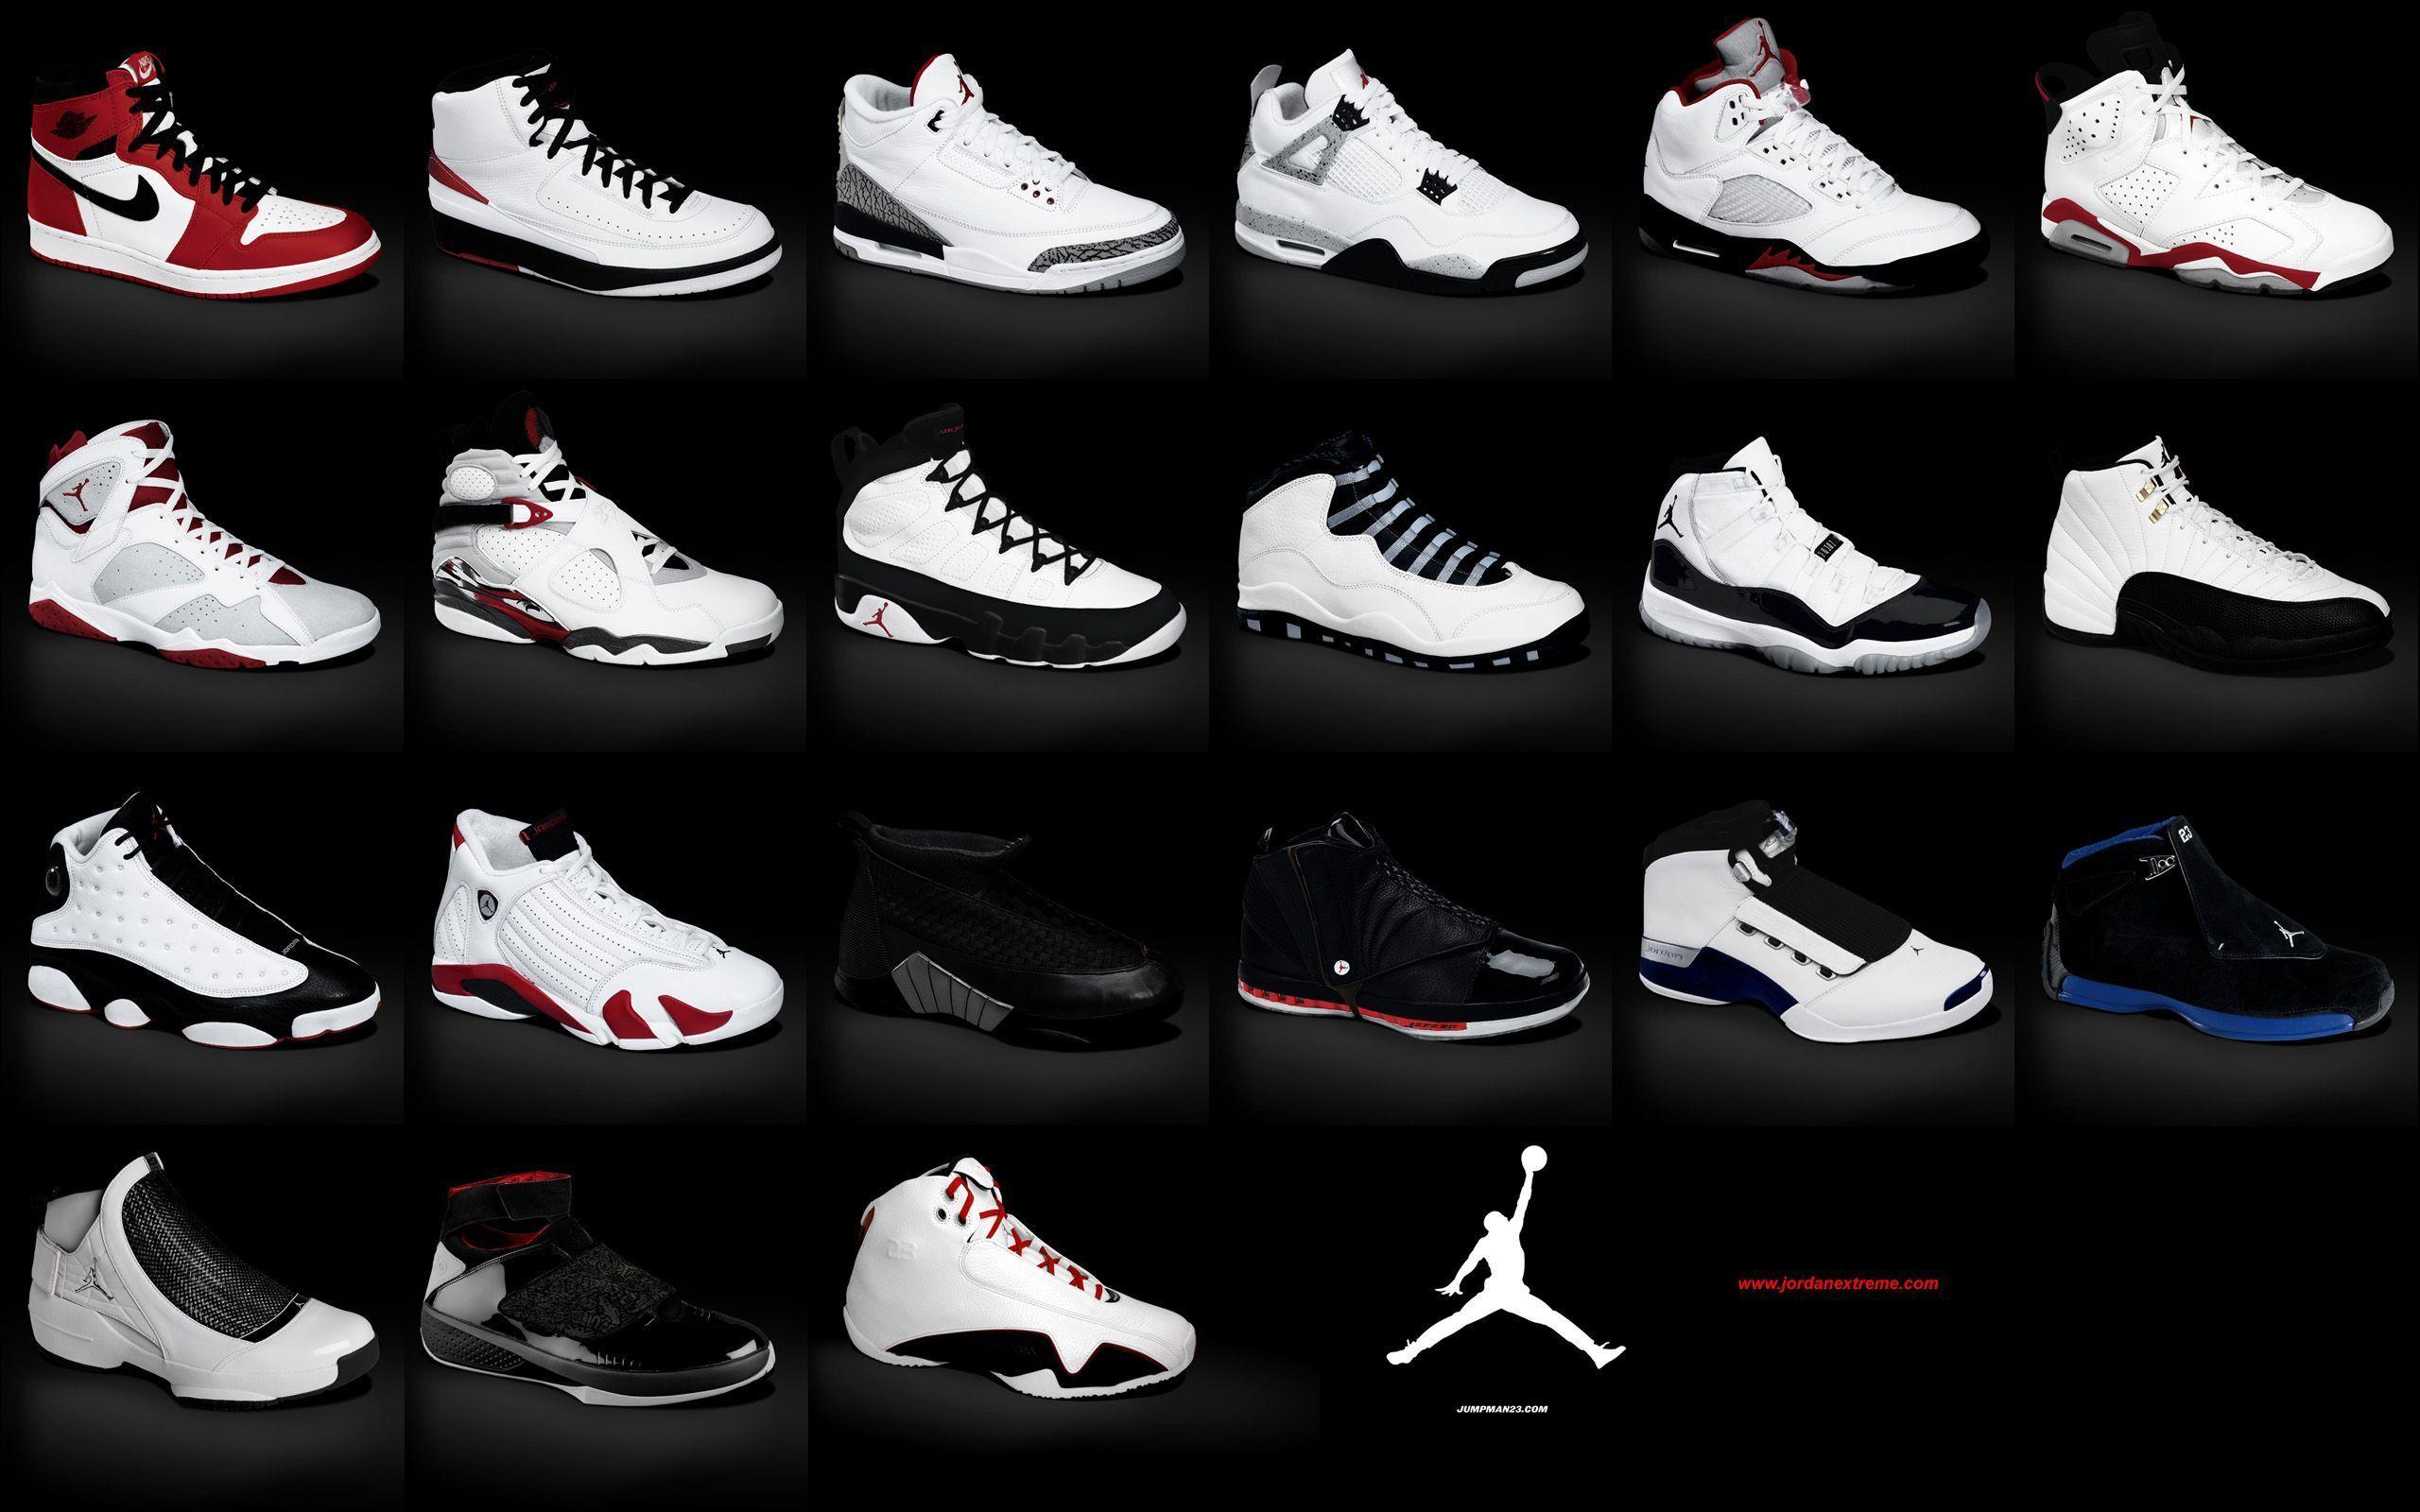 jordan shoes from 1 to 33